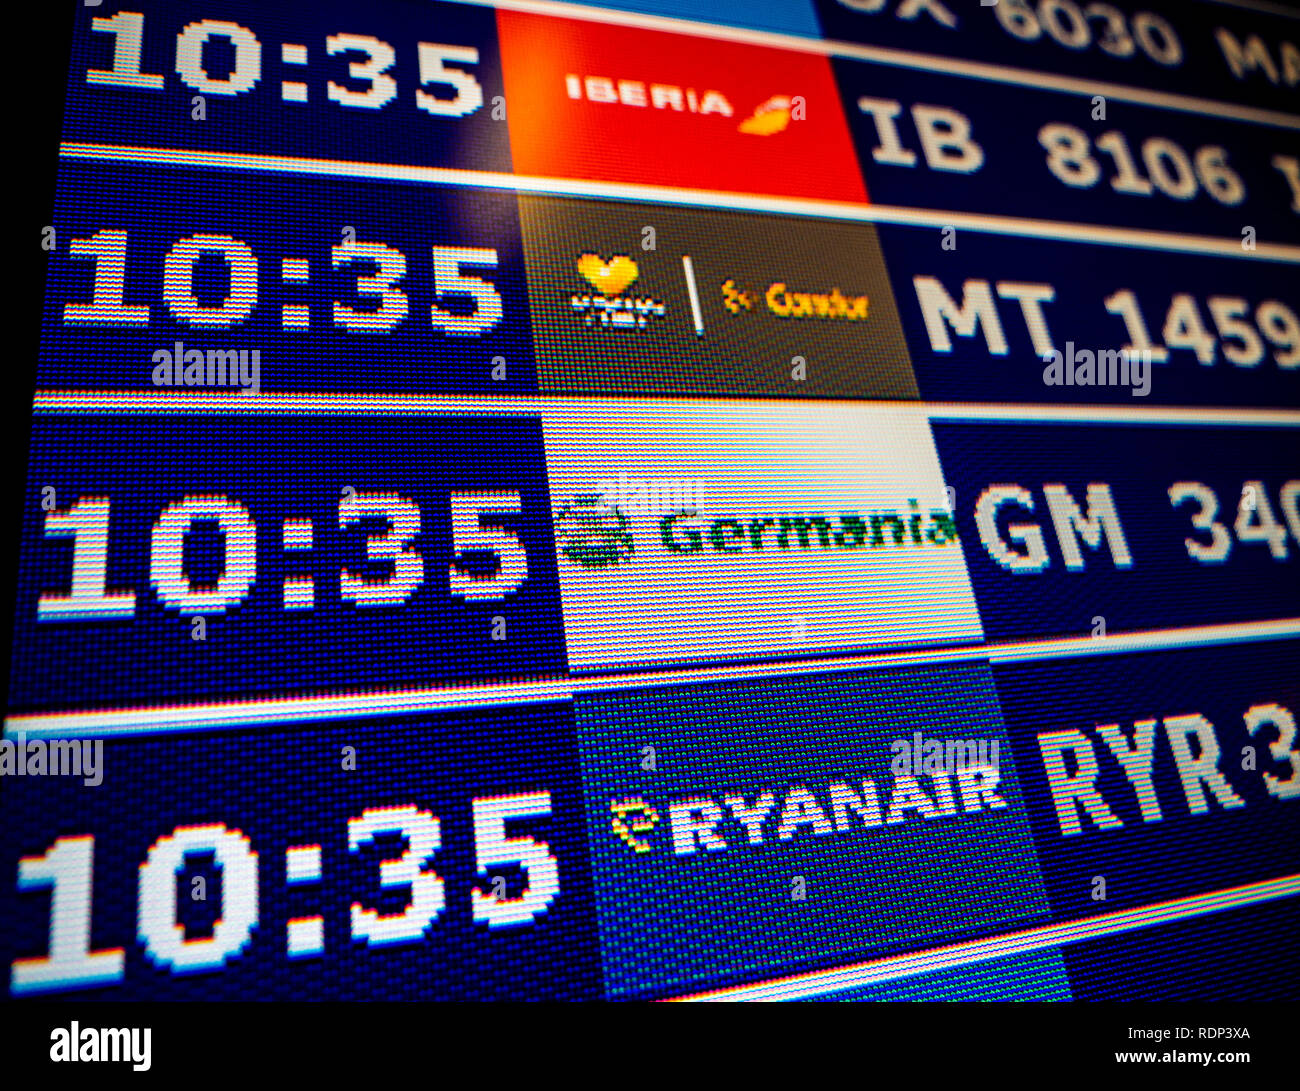 PALMA DE MALLORCA, SPAIN - MAY 11, 2018: Close-up details of a typical airport information board with mutiple airlines hours departure gates and insignia for the boarding gate Ryanair Germania Condor Iberia  Stock Photo